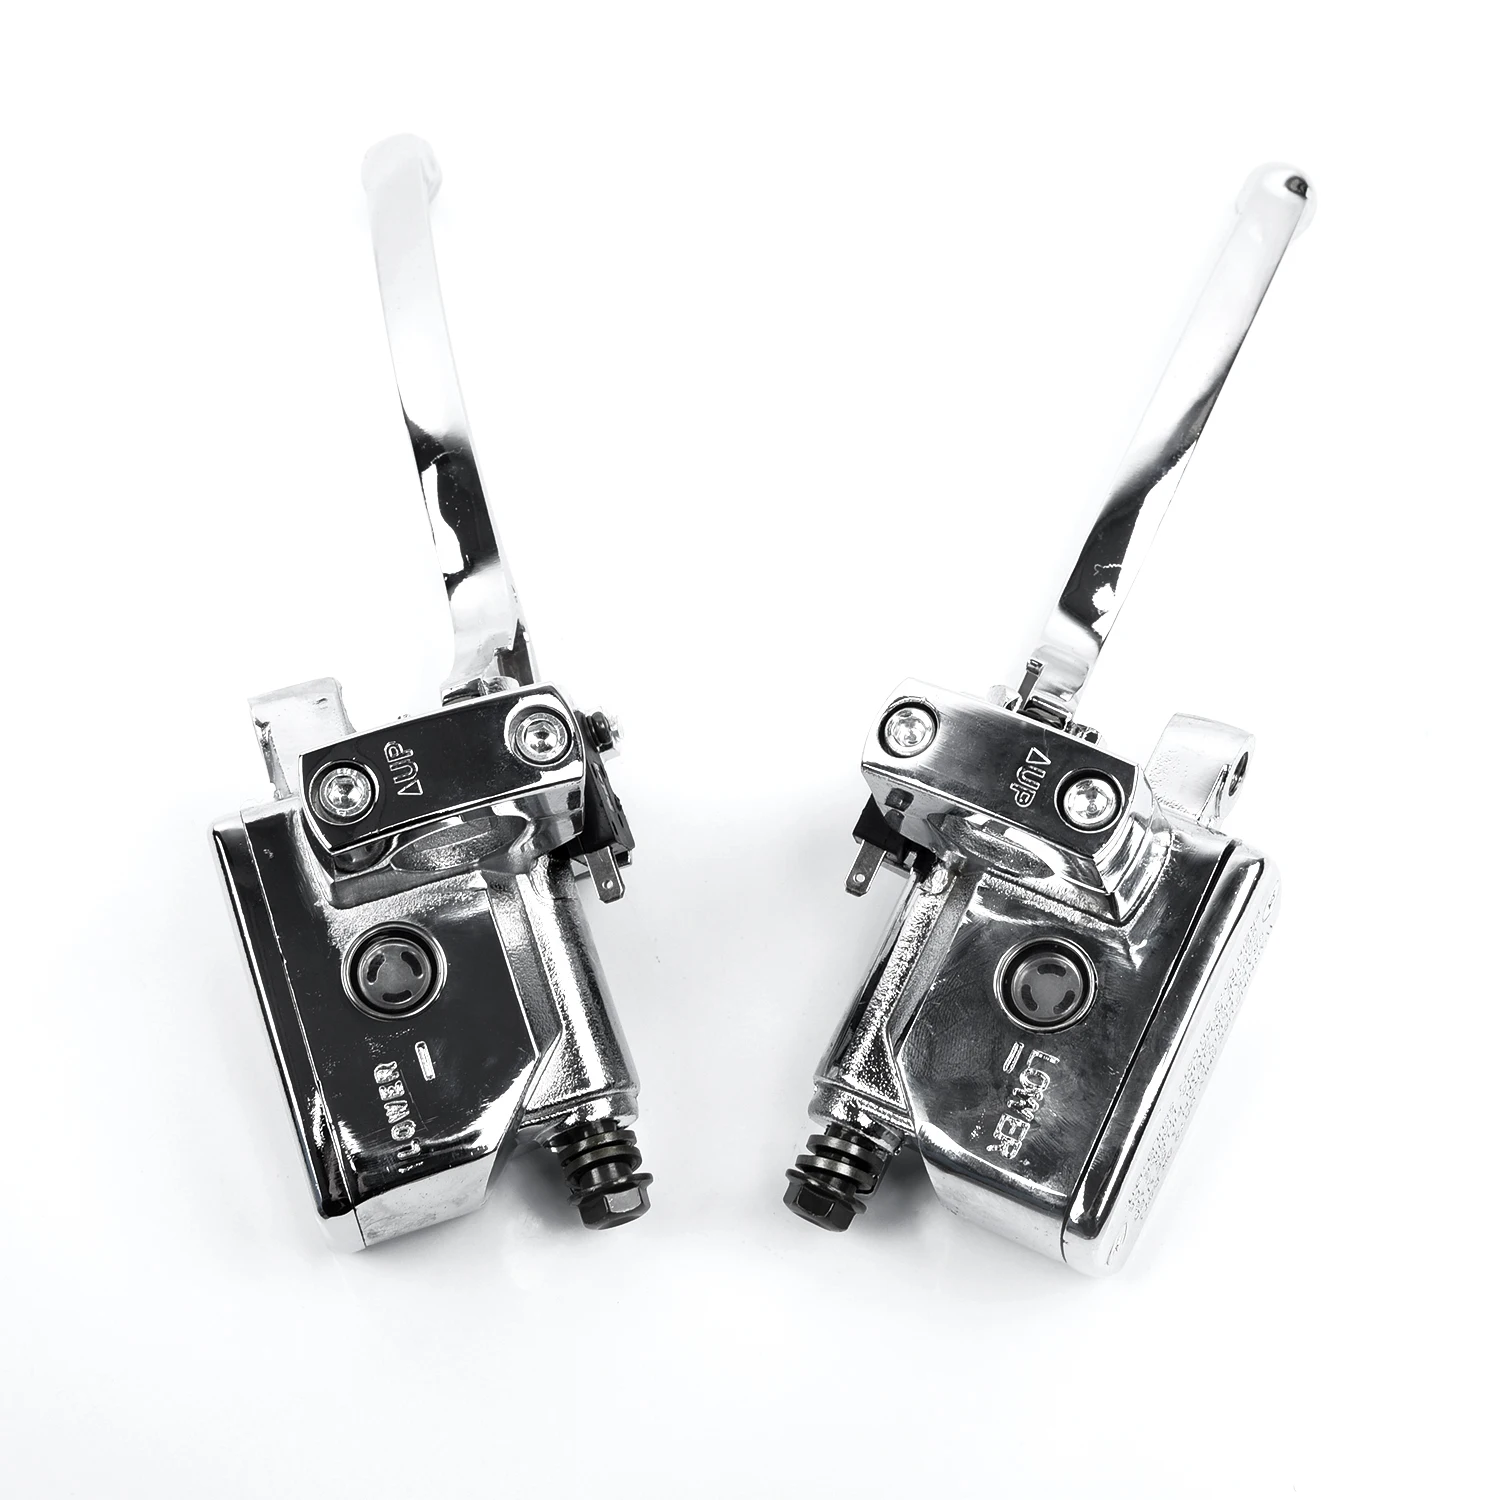 

Accessories Clutch Motorcycle Levers 25mm Handlebar Replacement 1 pair Chrome Brake Silver Useful High Quality